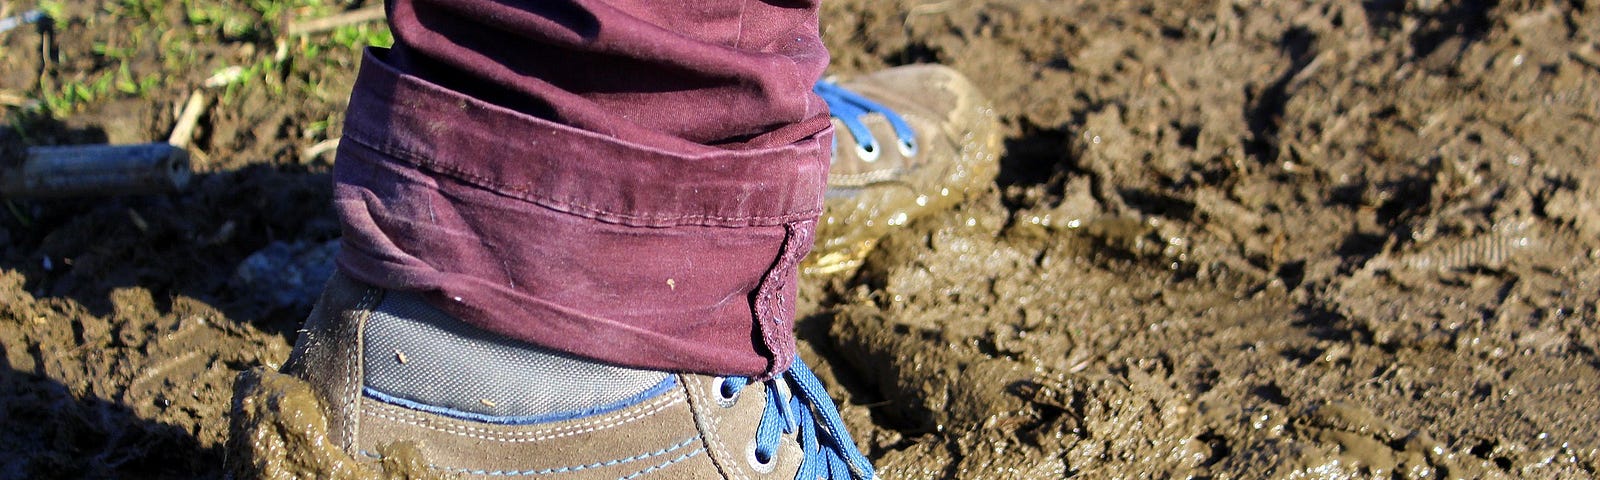 Photo of a pair of feet in walking shoes on a mud-sodden path